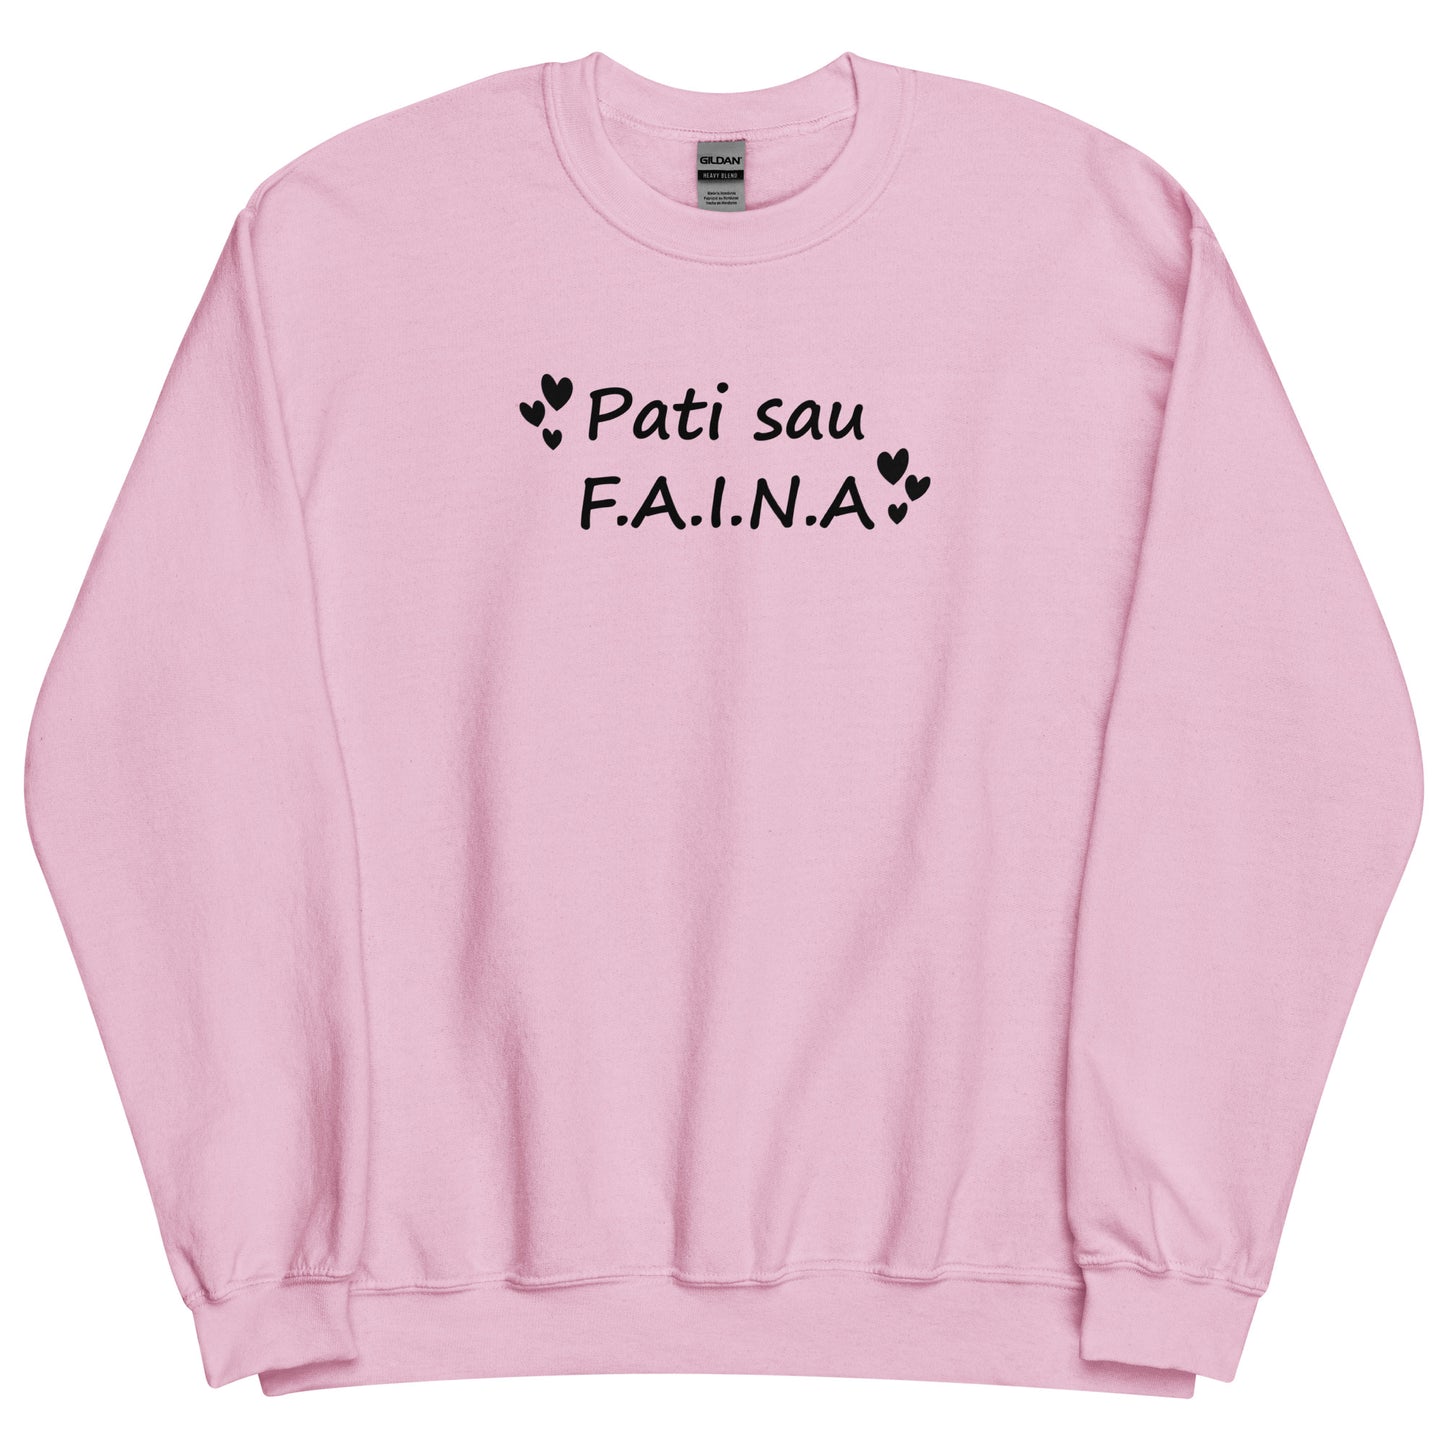 Unisex sweater: "Fine for yourself"